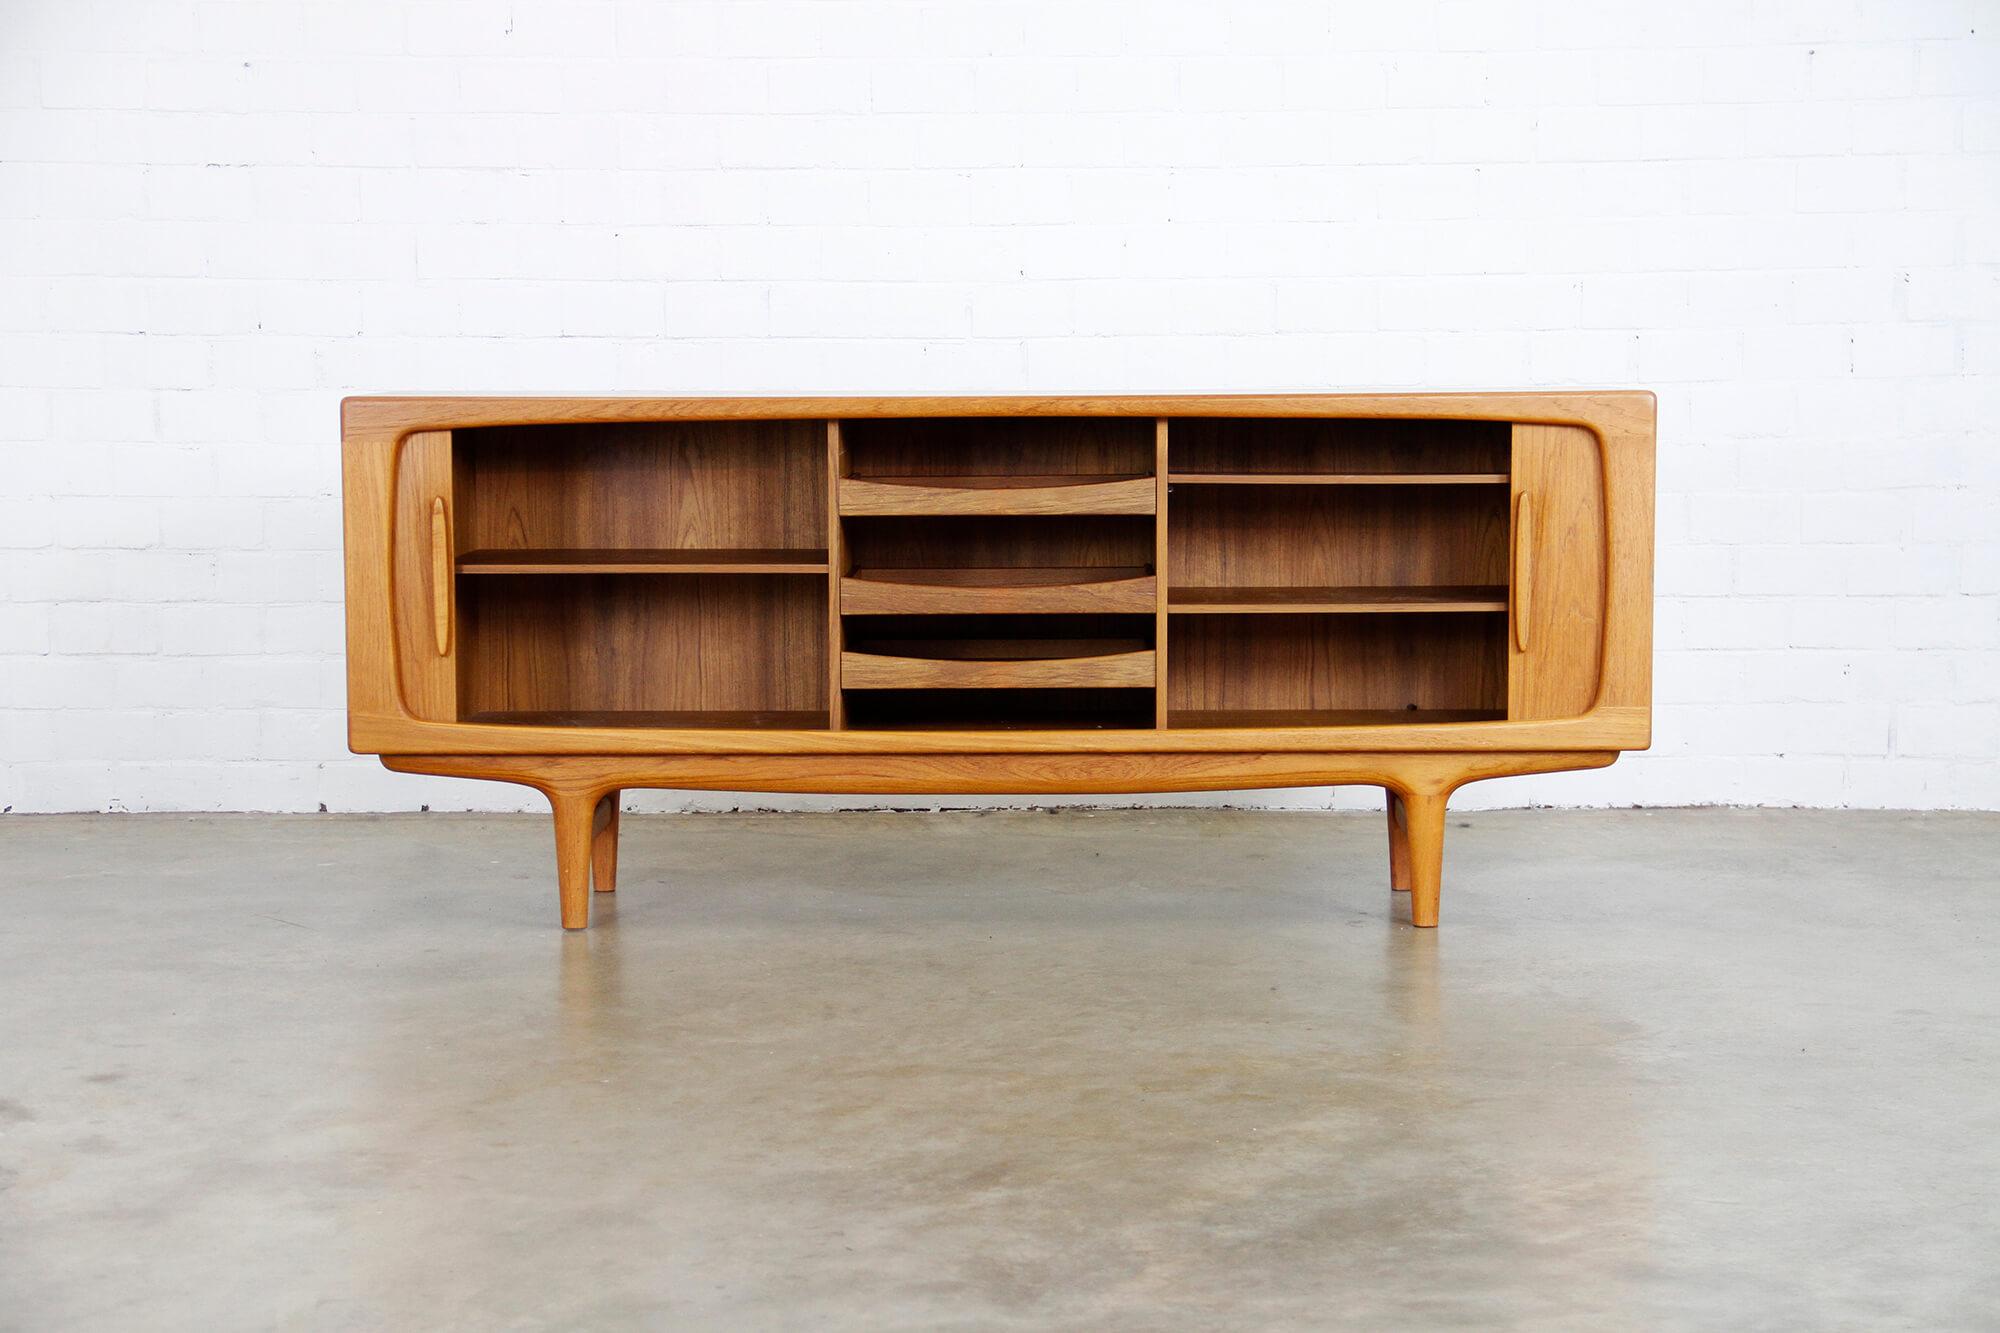 While information on designer Johannes Andersen is limited and difficult to verify, it is believed that he was born in 1903 in Aarhus, Denmark, and that he initially apprenticed as a cabinetmaker. He went on to work for many years in a number of